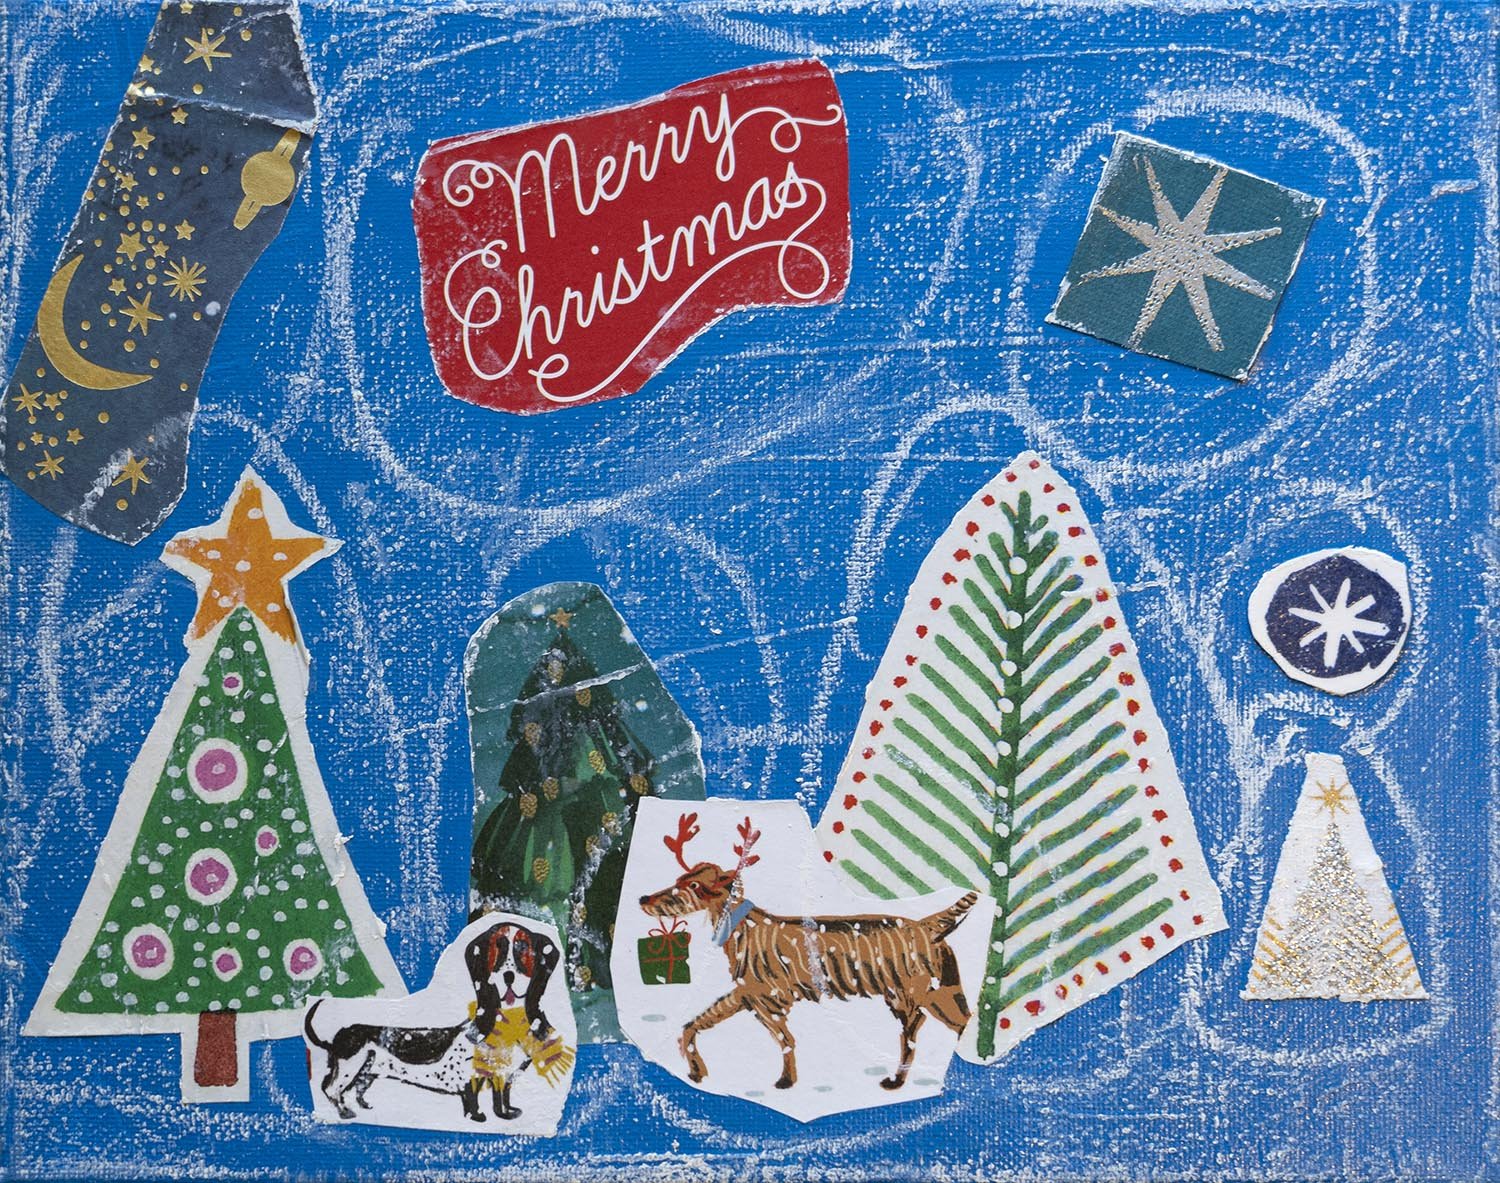 'Christmas Dogs' artwork by Emma Hitsman